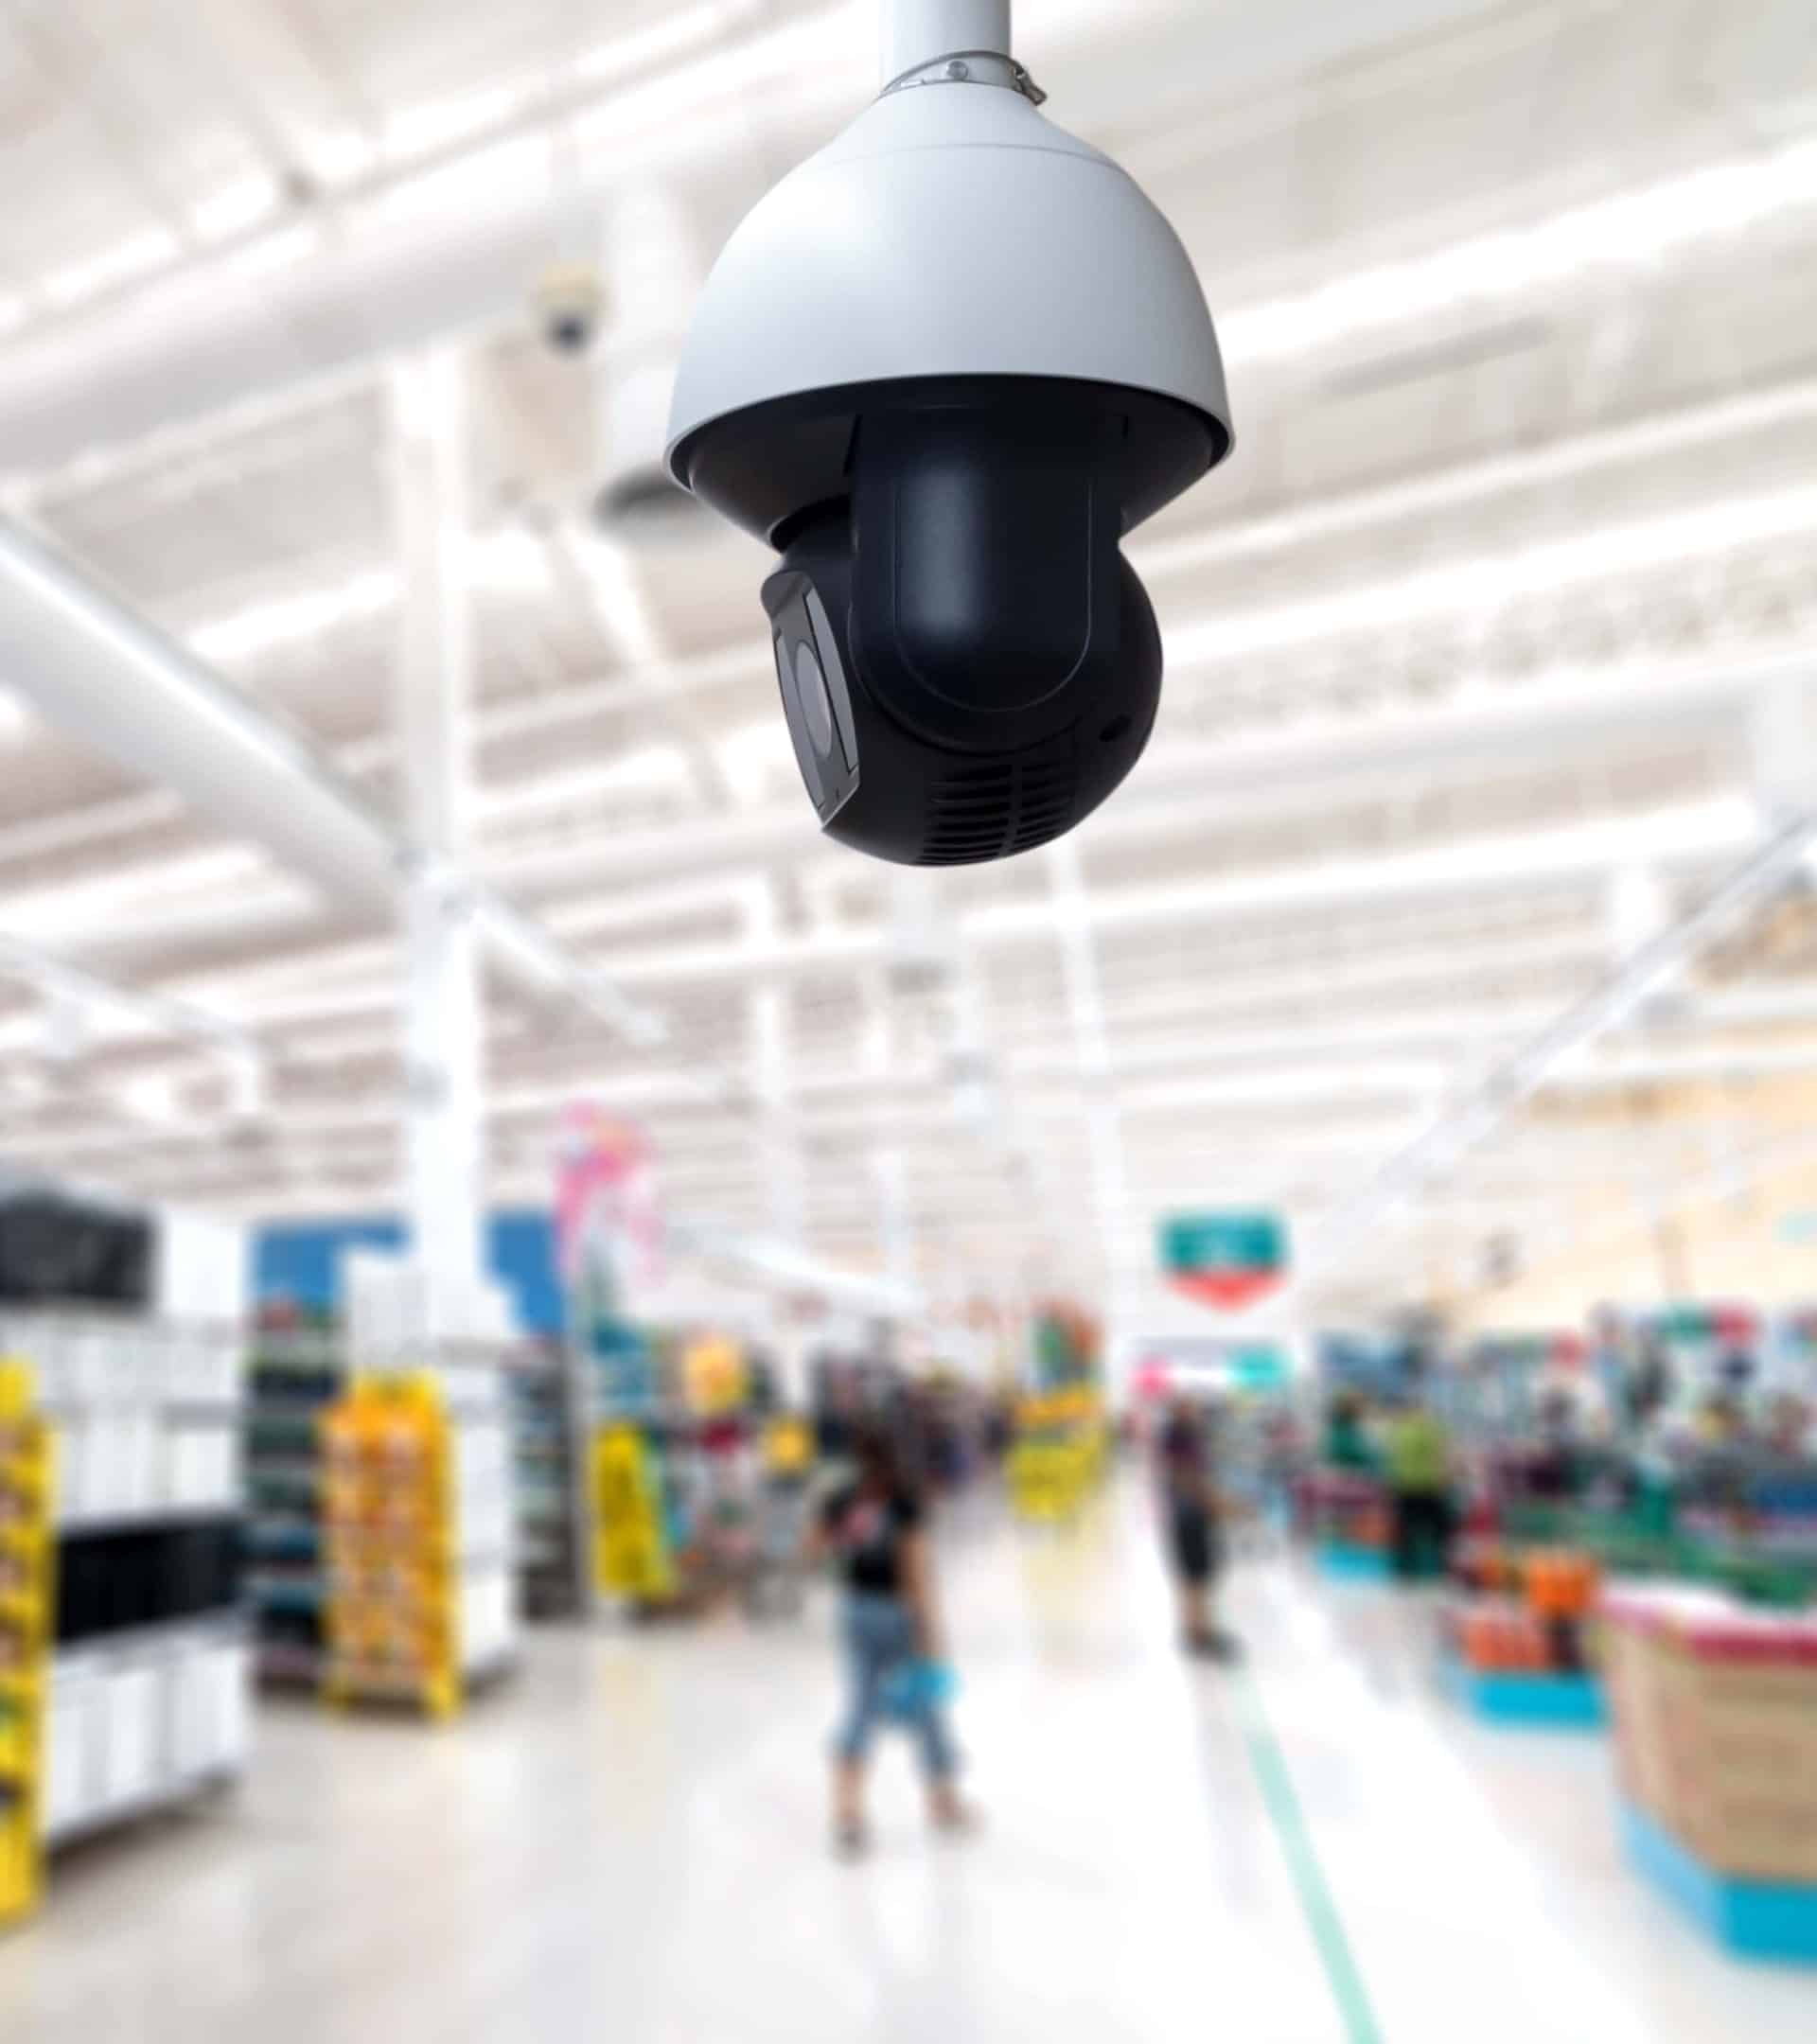 general store security camera featured in the foreground of a bustling store checkout area in the blurred background